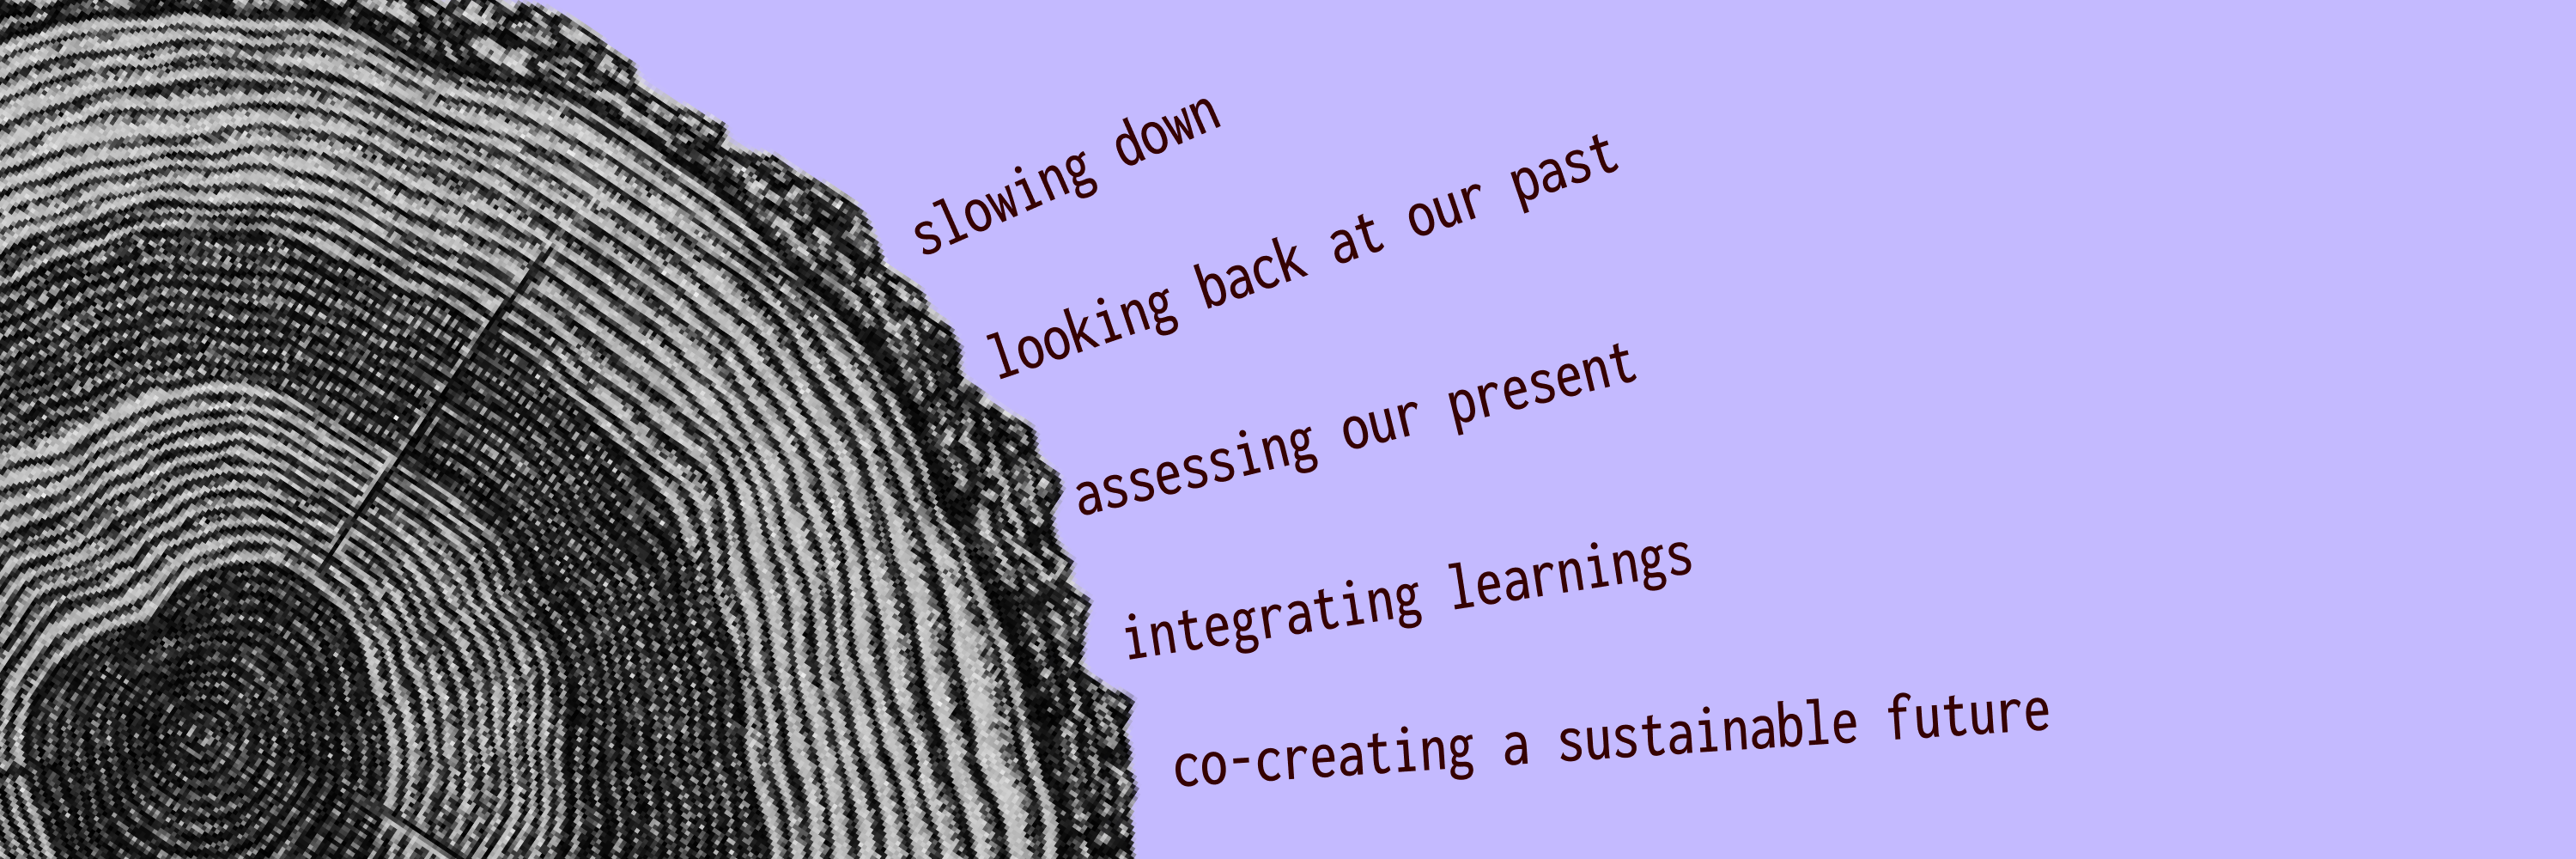 A cross-section of a tree trunk, with tree rings clearly displayed. Bullet points to the right of the tree rings contain the following text: slowing down, looking back at our past, assessing our present, integrating learnings, and co-creating a sustainable future.